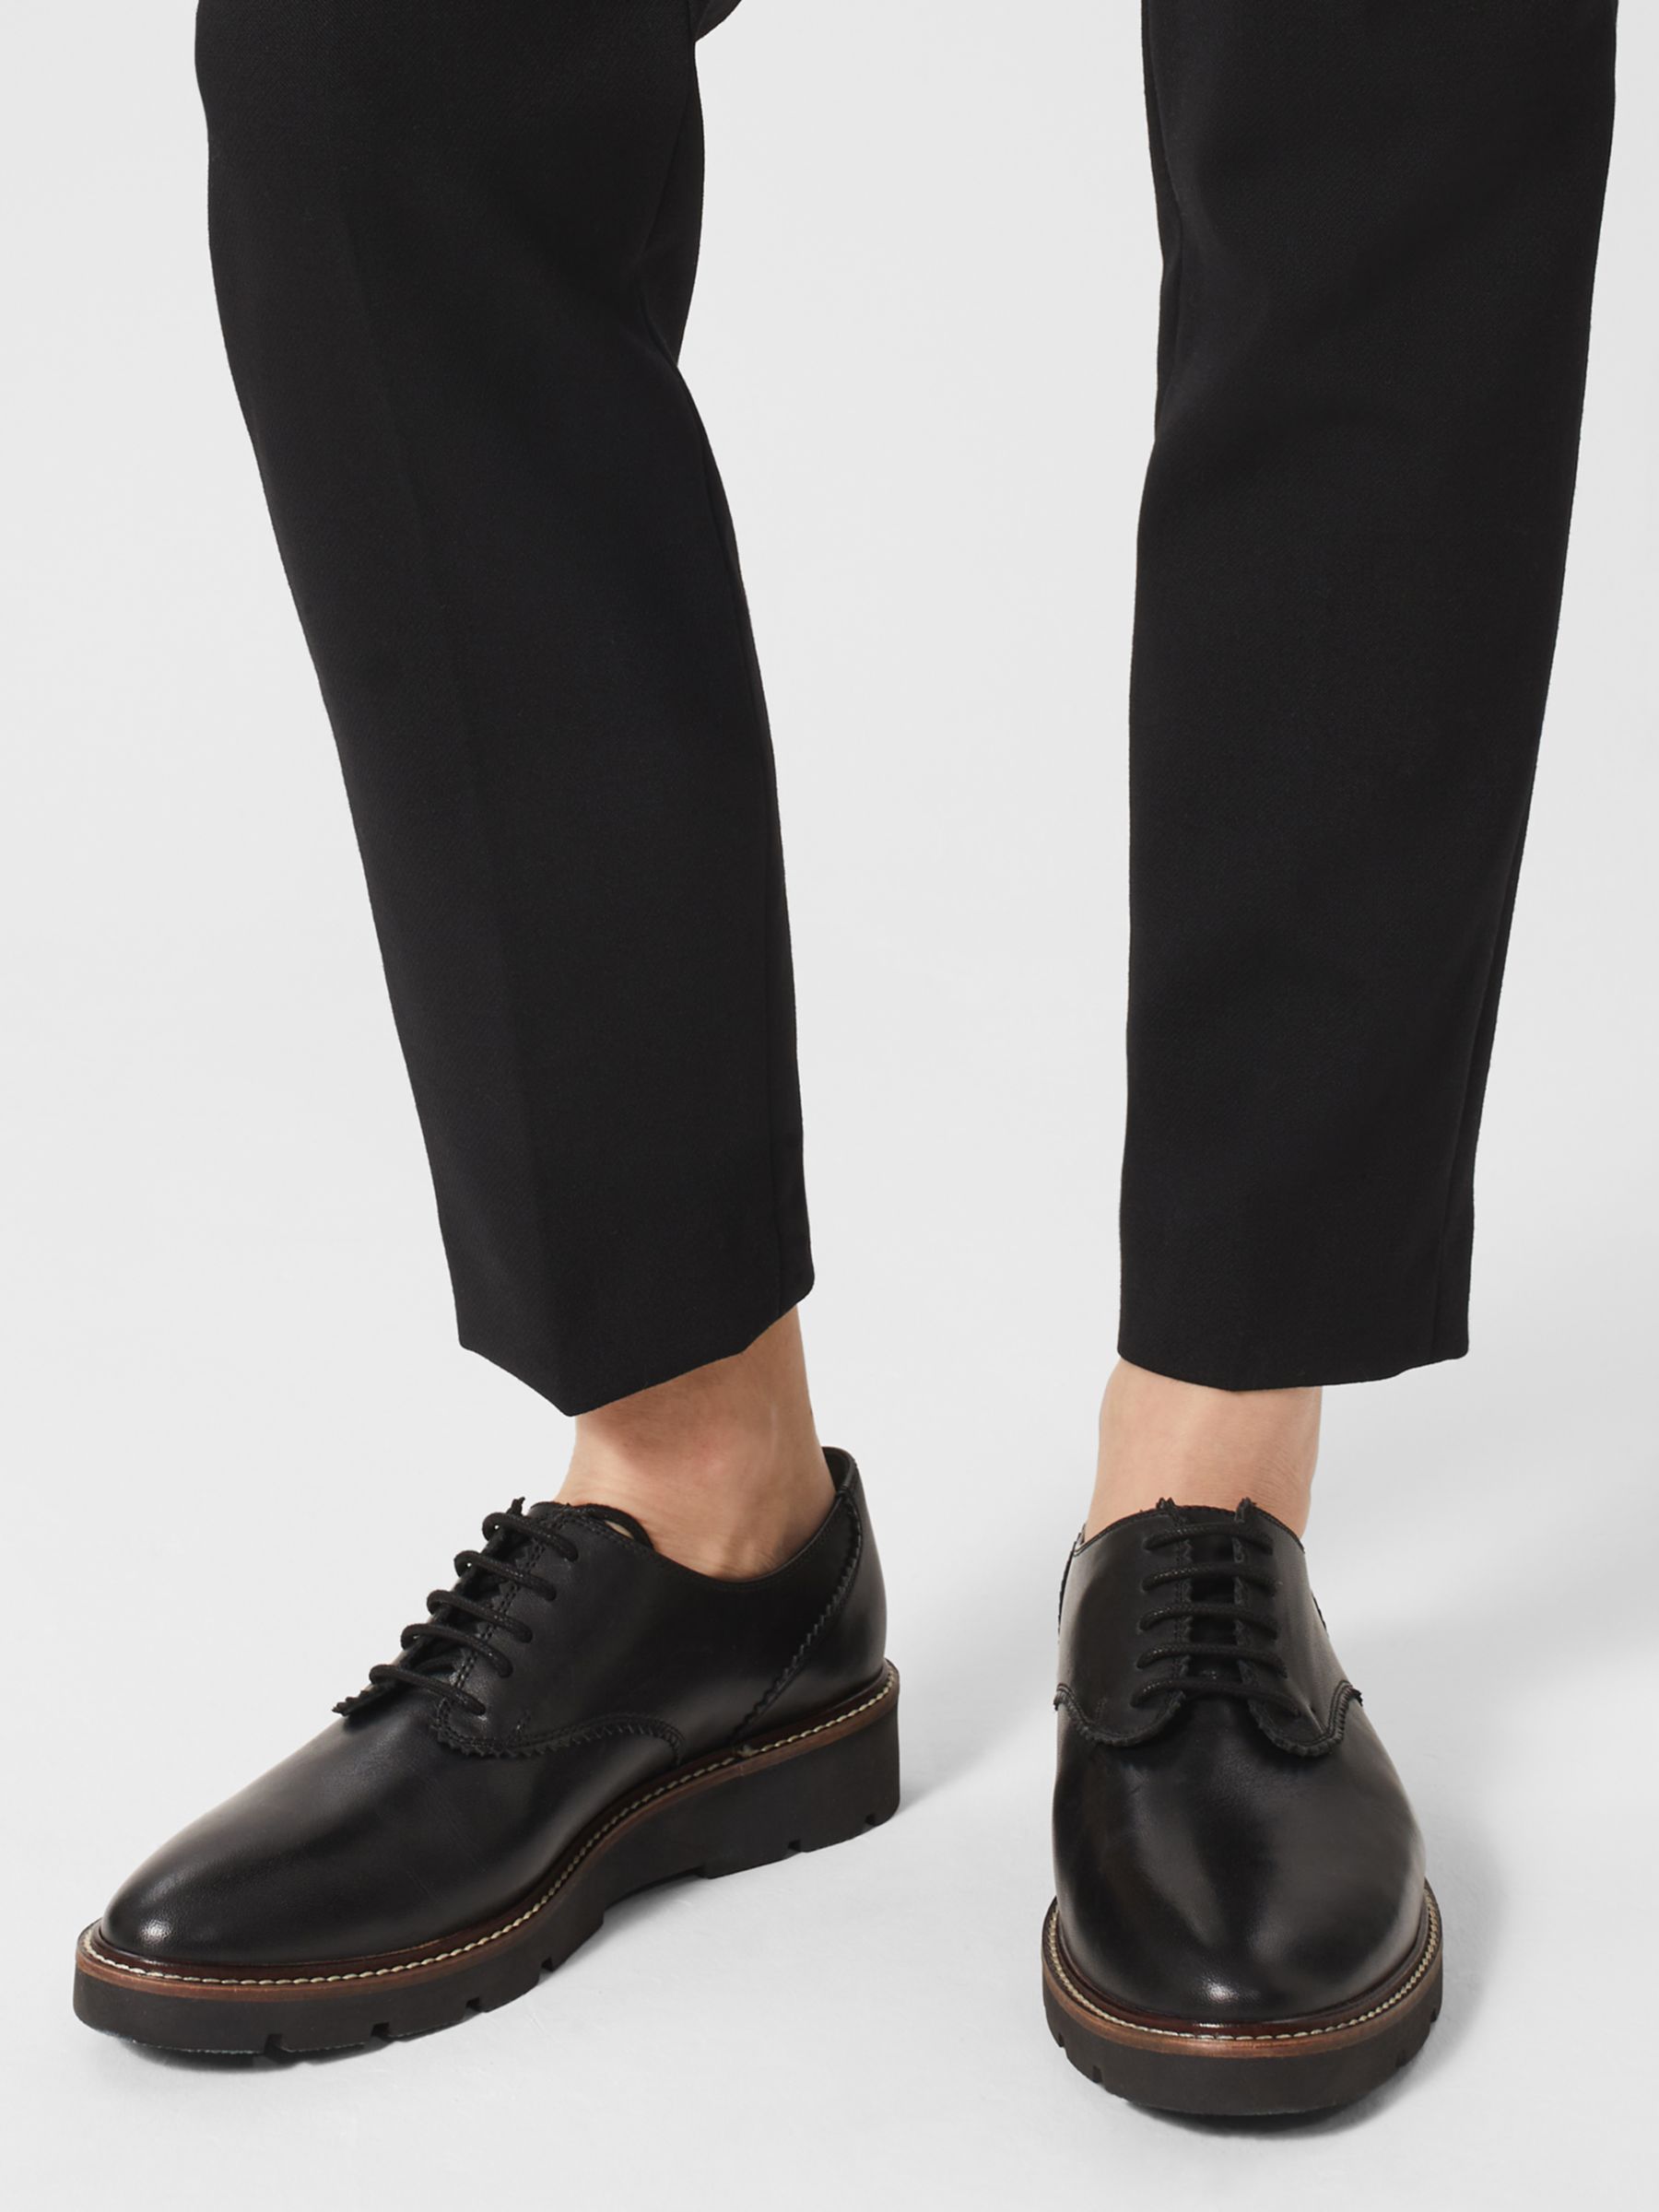 Buy Hobbs Chelsea Lace Up Leather Brogues, Black Online at johnlewis.com